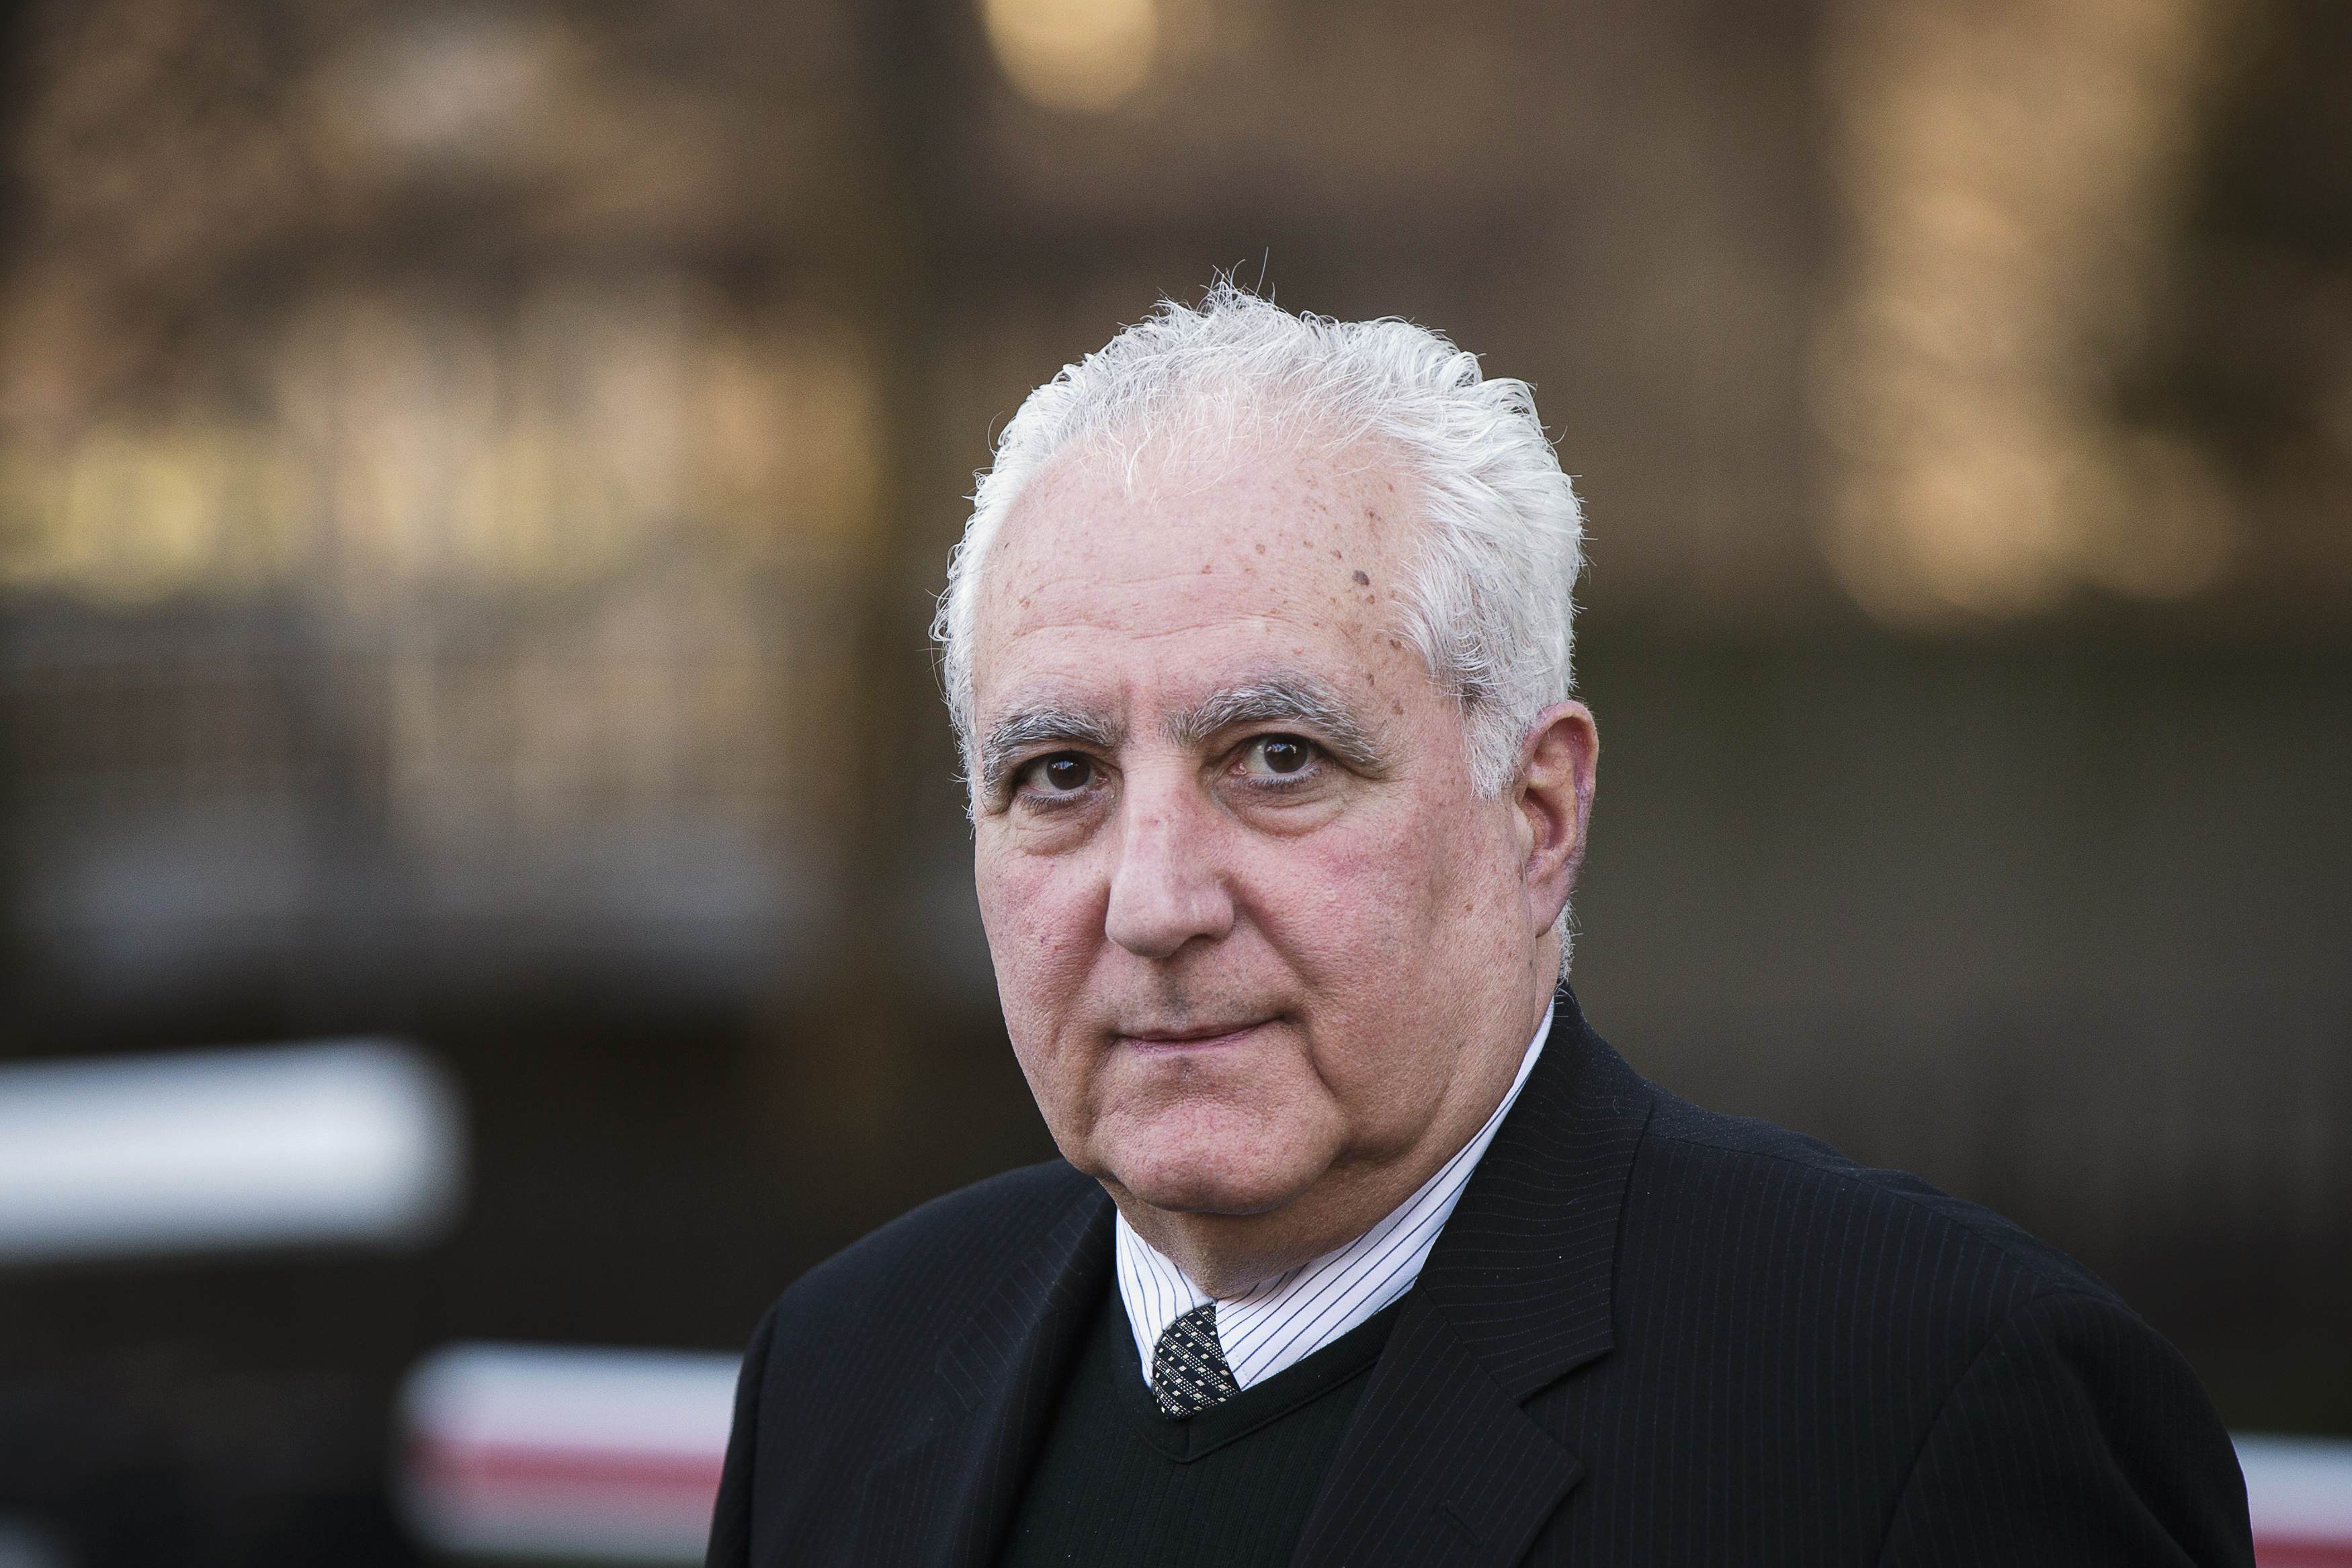 Former Madoff executive gets 10 years in prison - CBS News